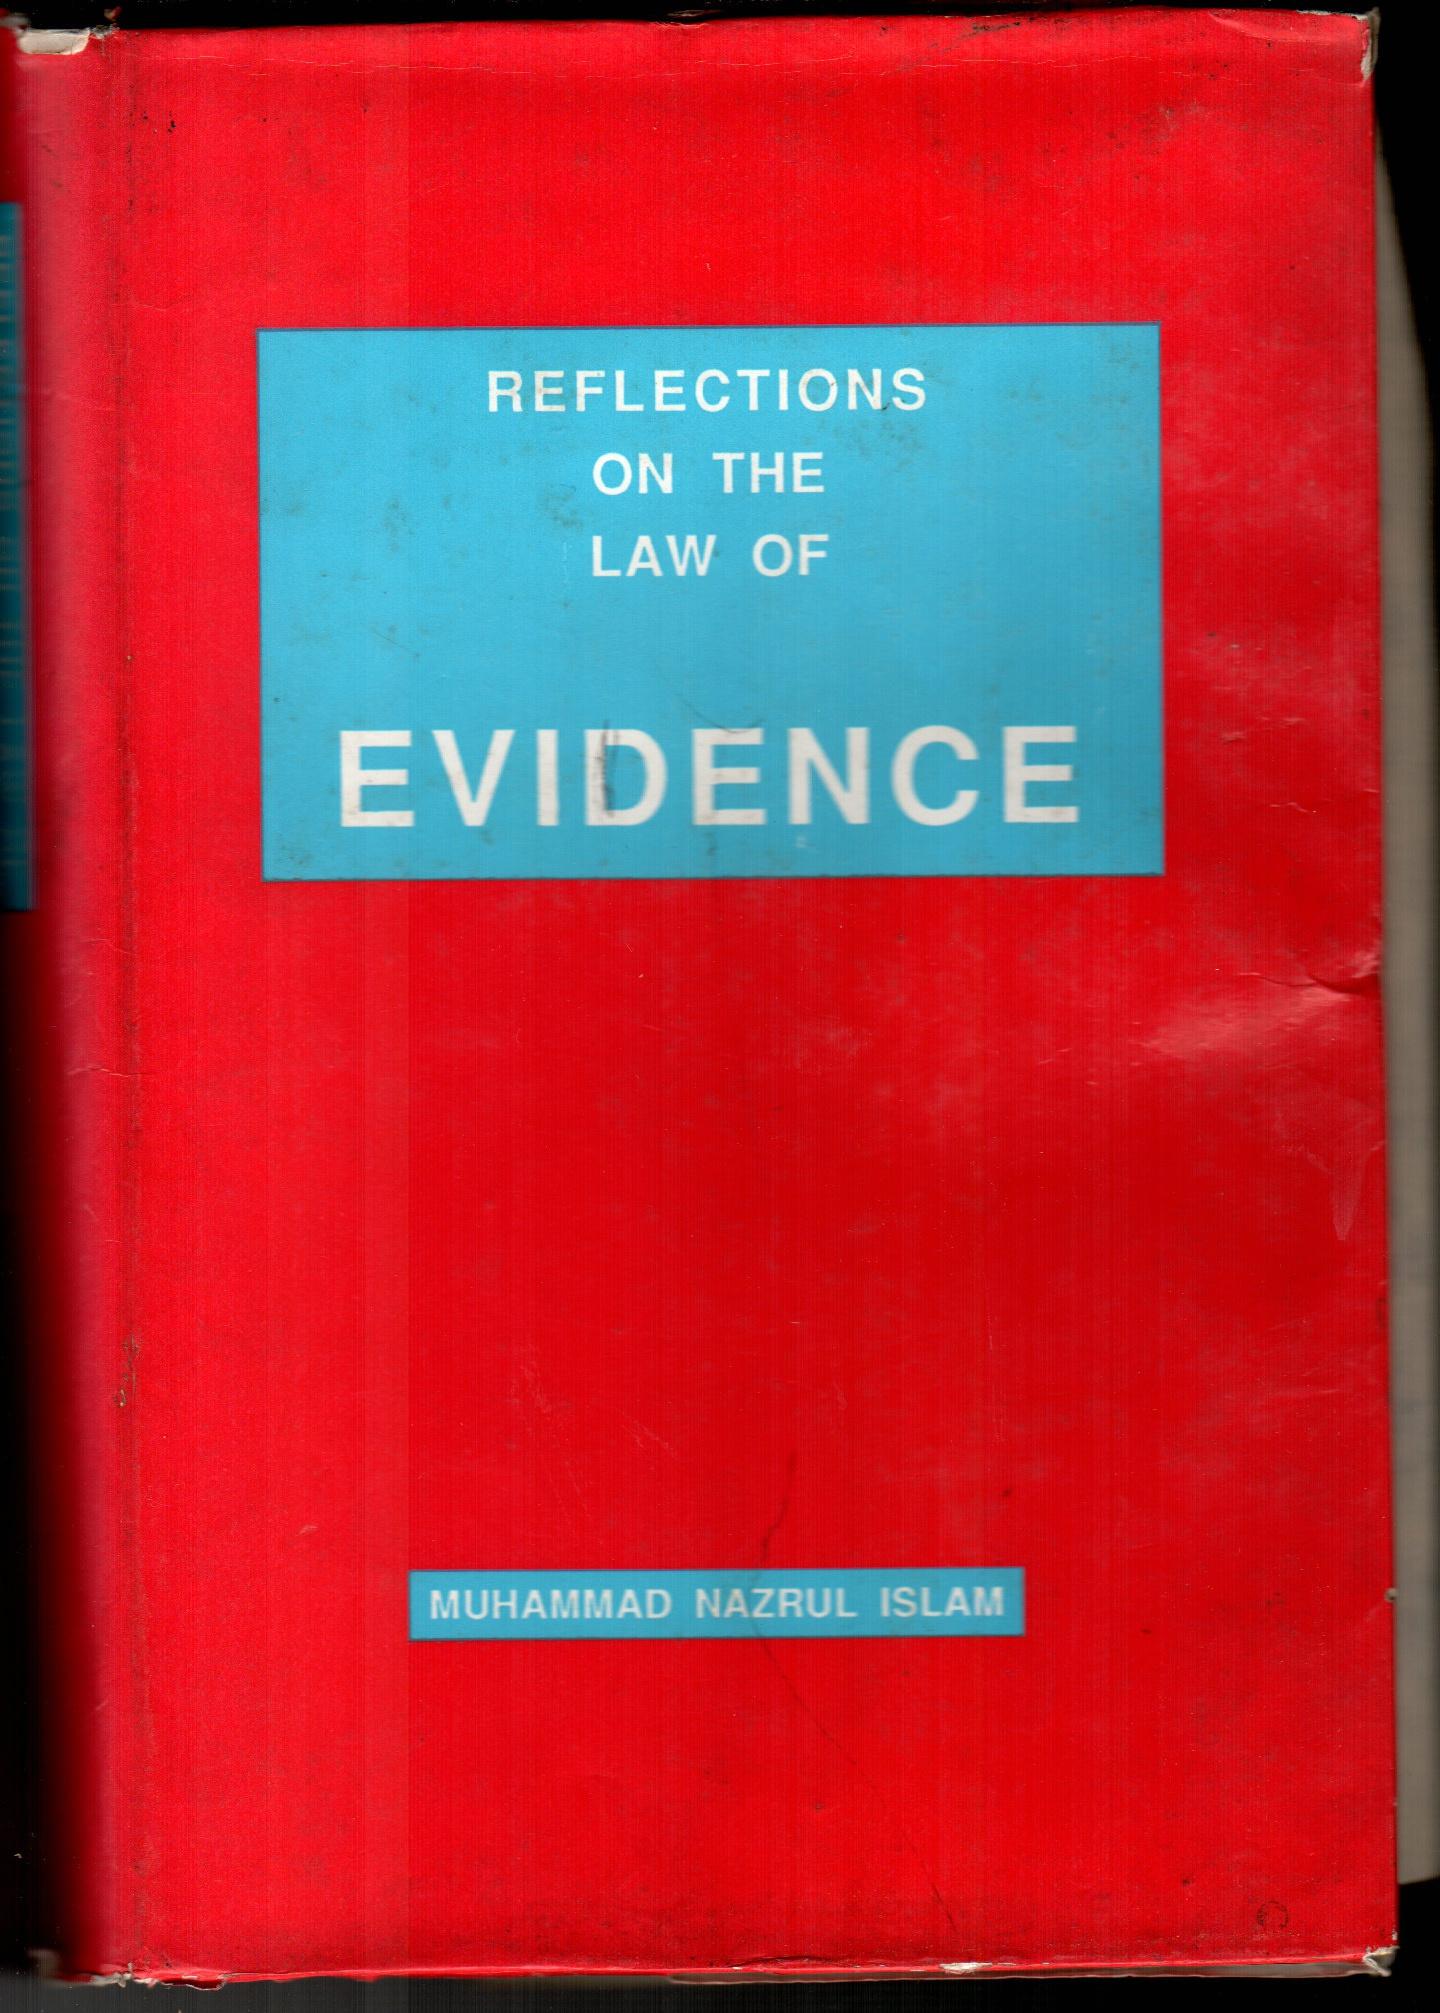 Reflection on the law of Evidence